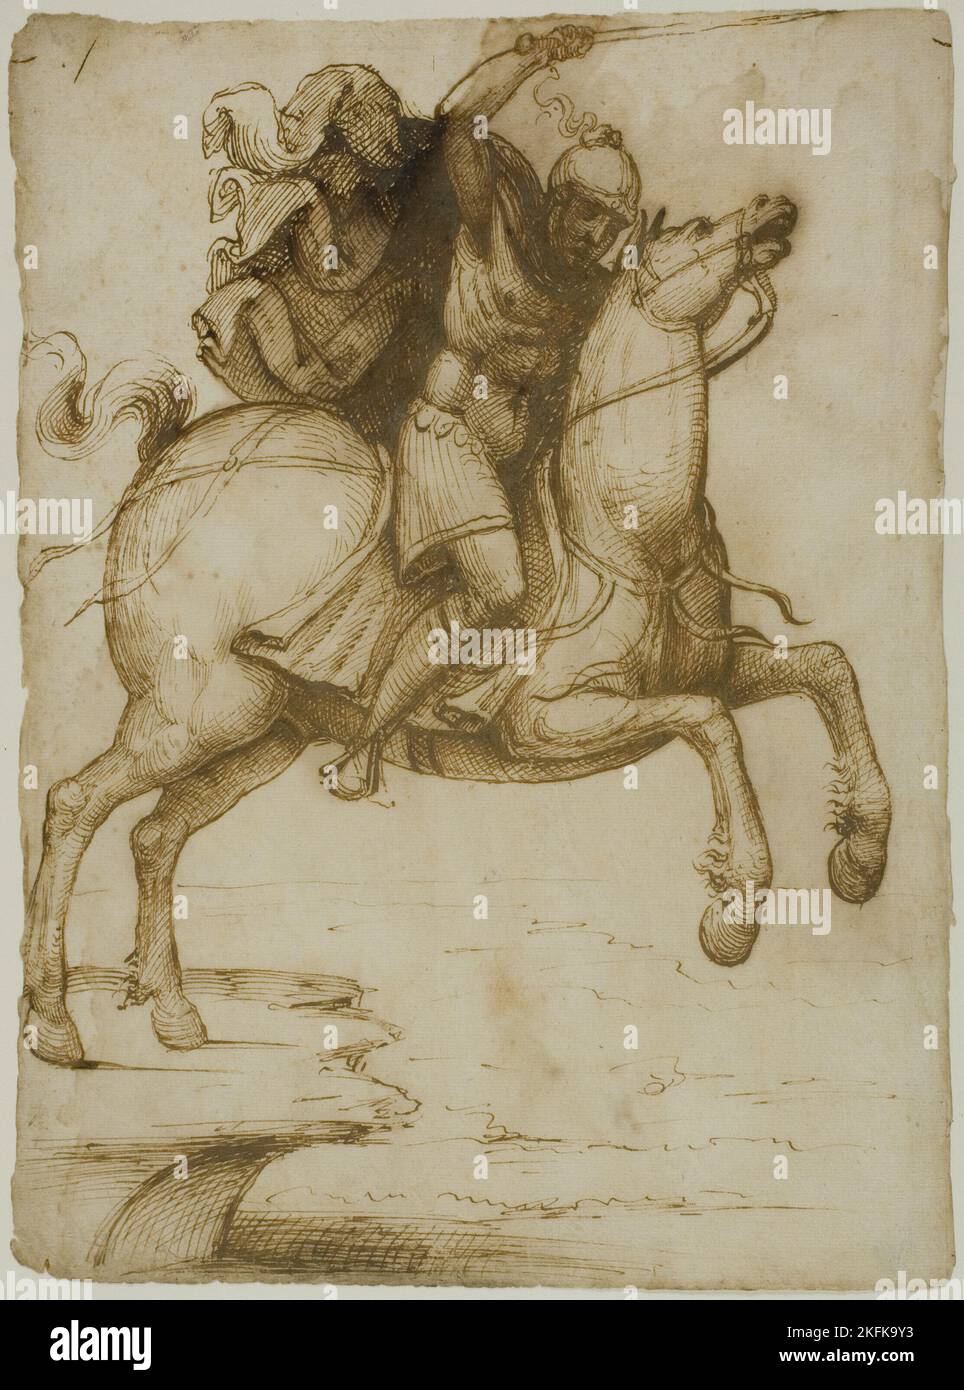 Marcus Curtius Leaping into the Abyss, c. 1530. Stock Photo